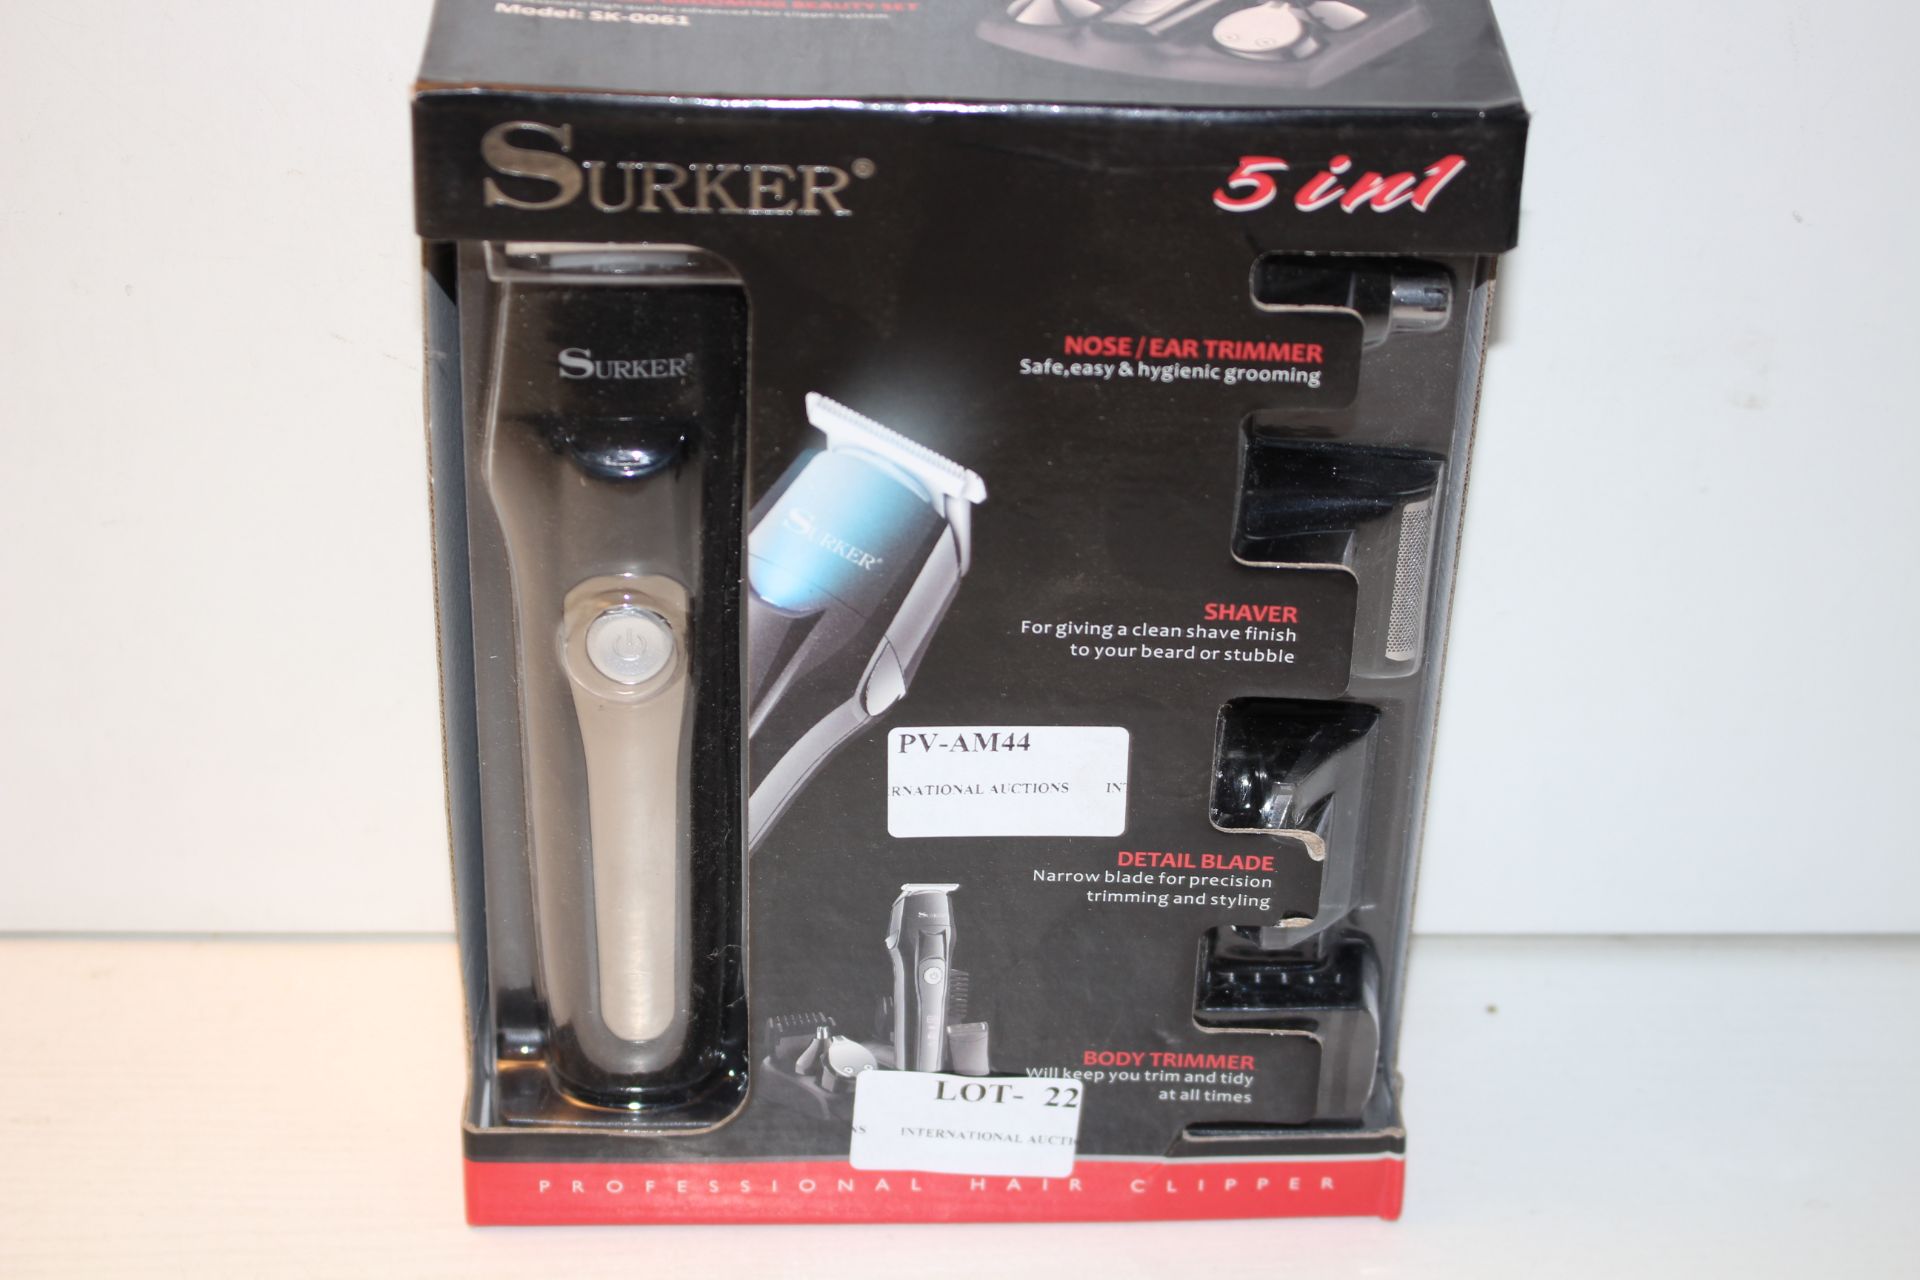 BOXED SURKER 5-IN-1 PROFESSIONAL HAIR CLIPPER RRP £39.99Condition ReportAppraisal Available on